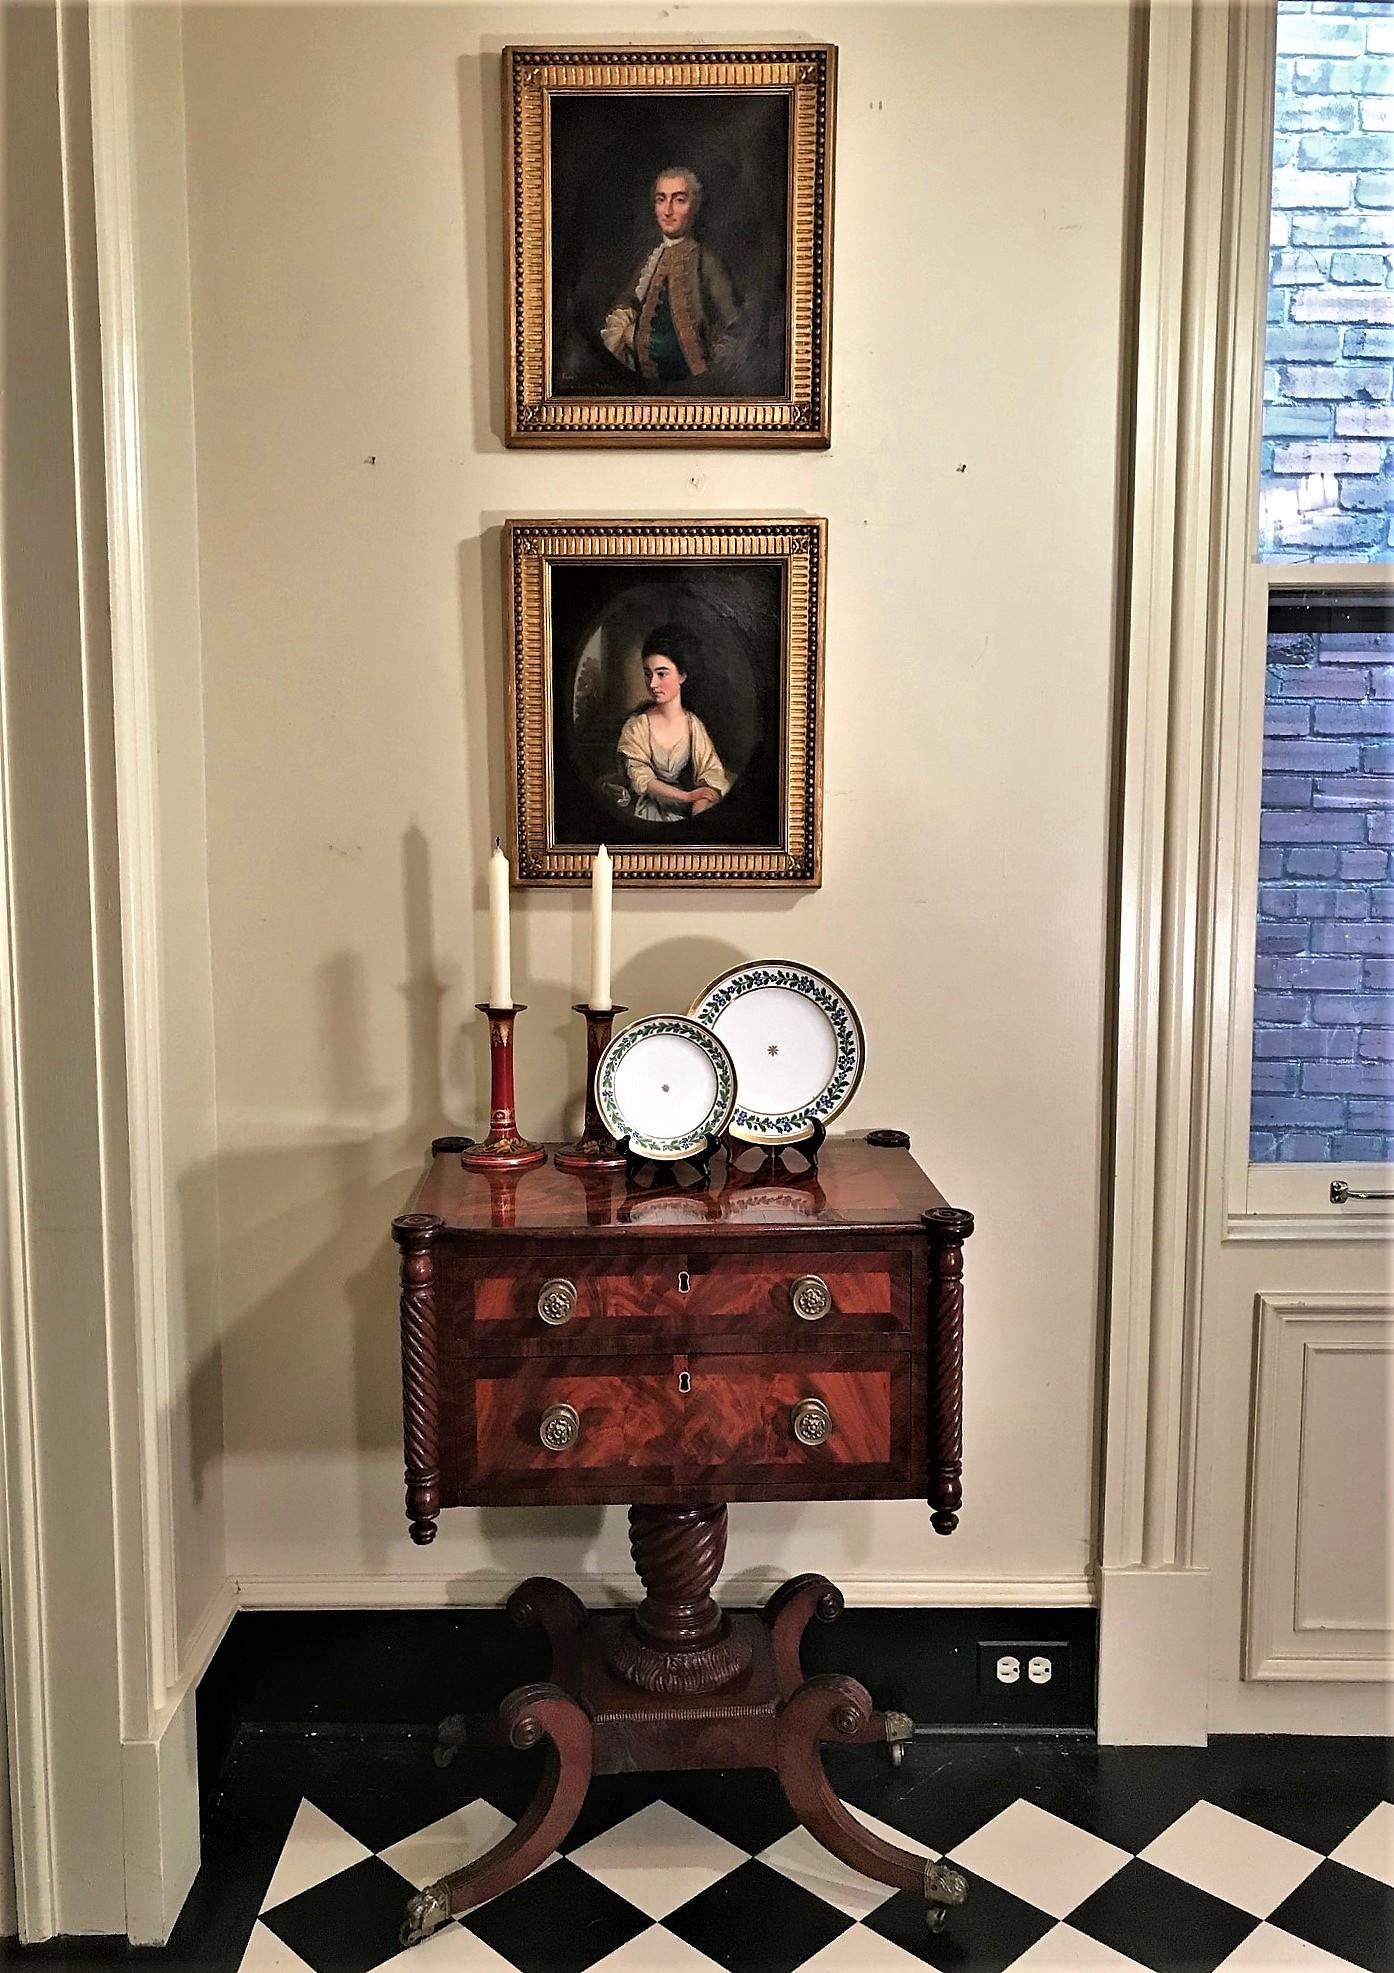 This handsome unique sewing/work stand is quintessentially the work of a master Philadelphia cabinetmaker. It has 2 drawers with replaced hand-cast solid brass pulls and original brass locks. The top drawer has a sliding removable divided mahogany